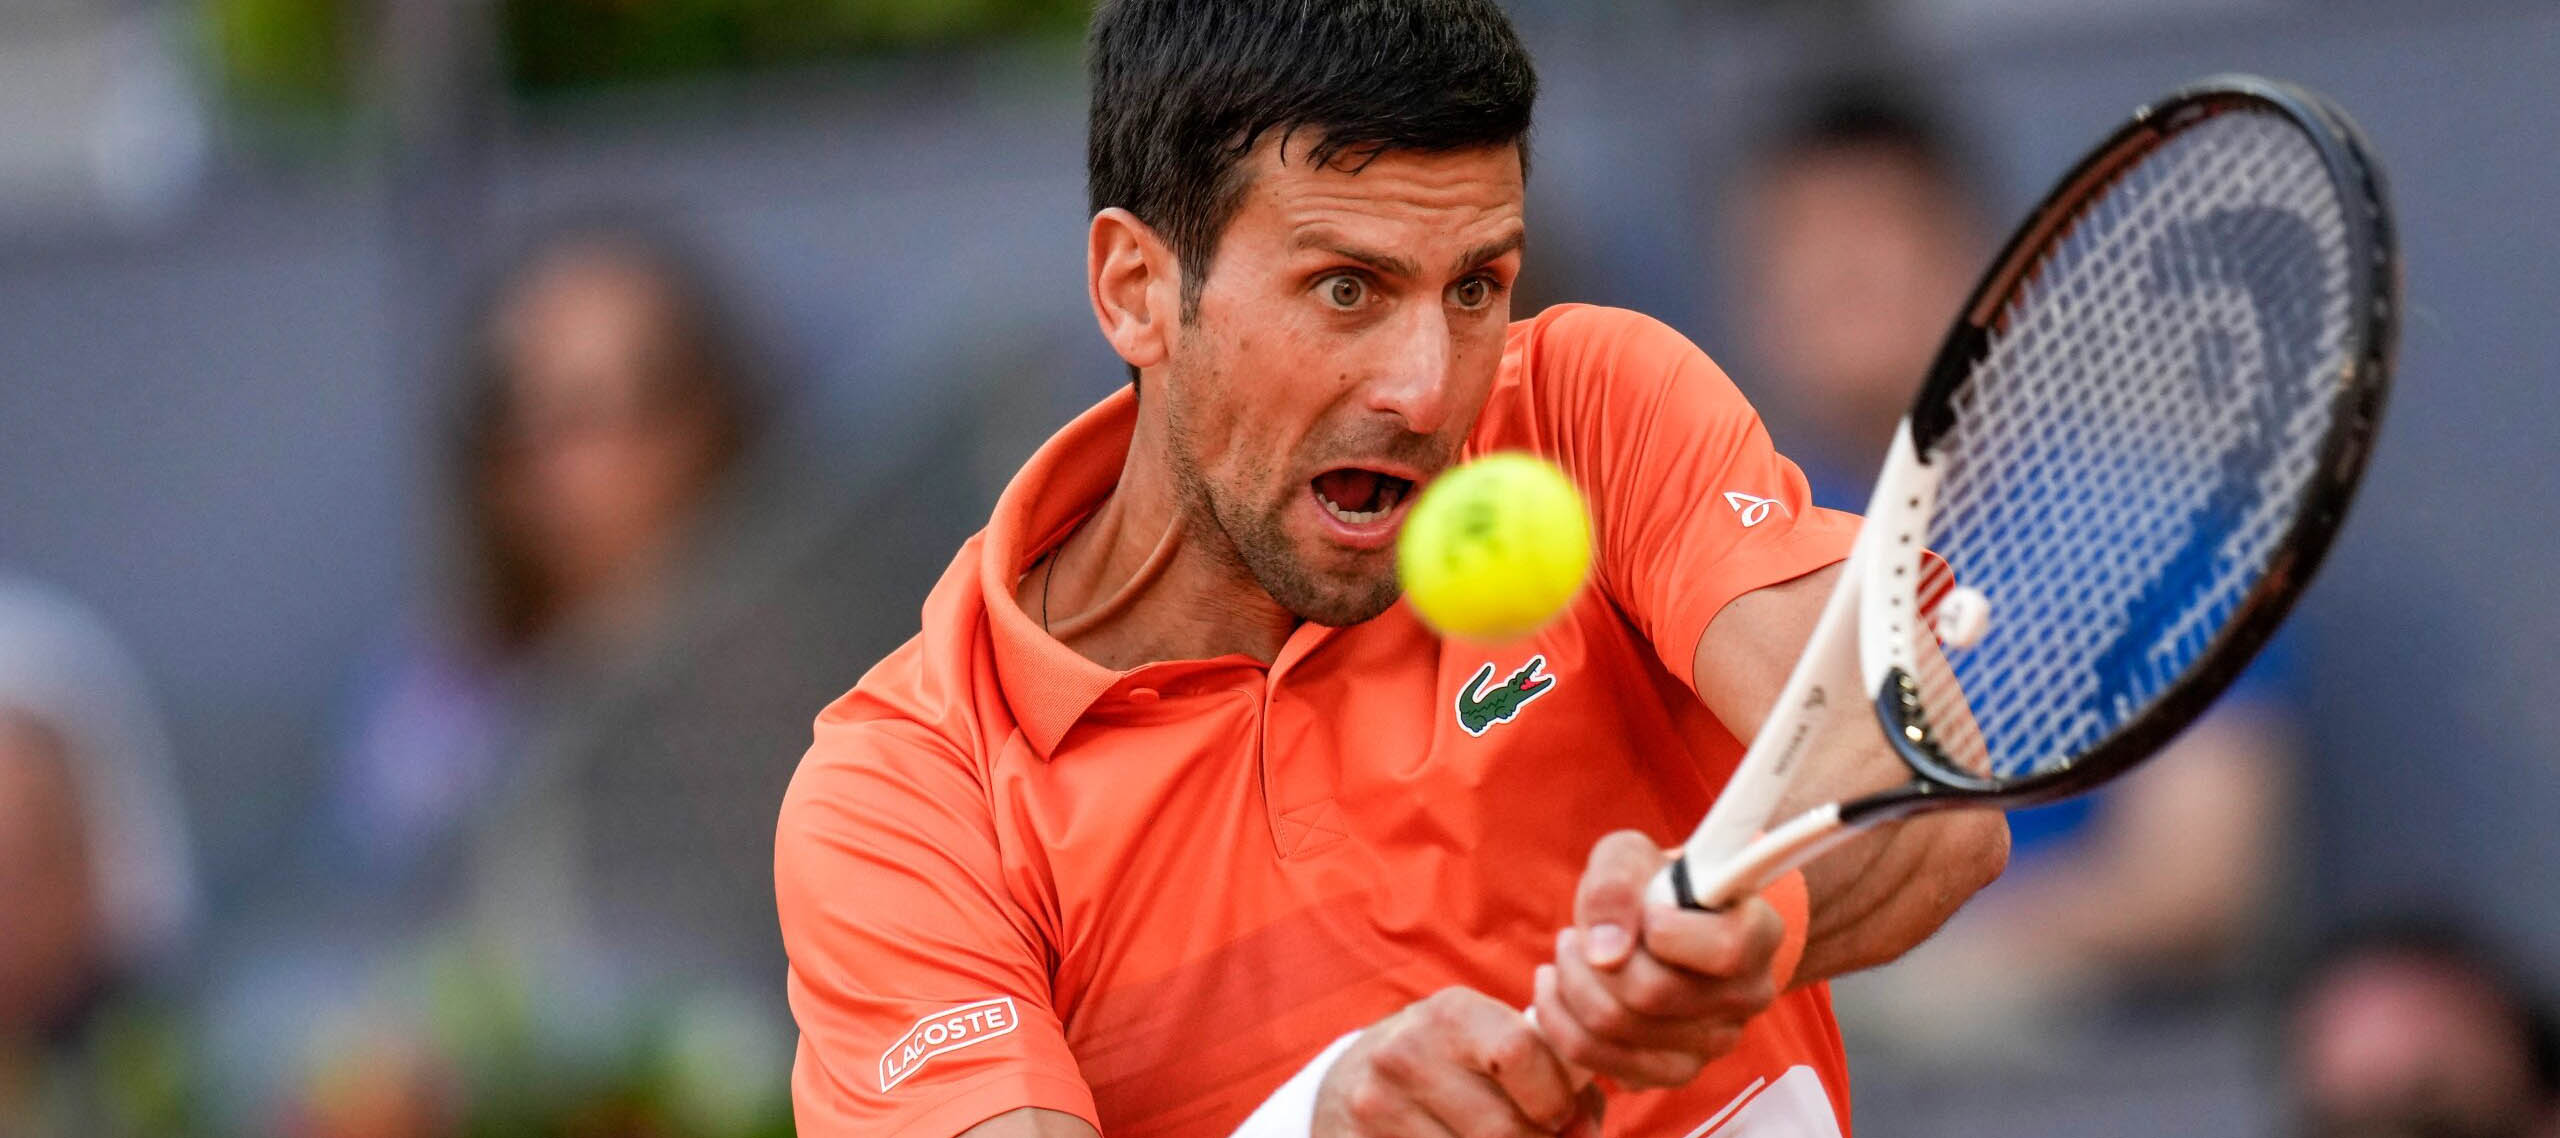 2022 French Open Betting Analysis Odds Favorites to Win the 1st Round of the Roland-Garros